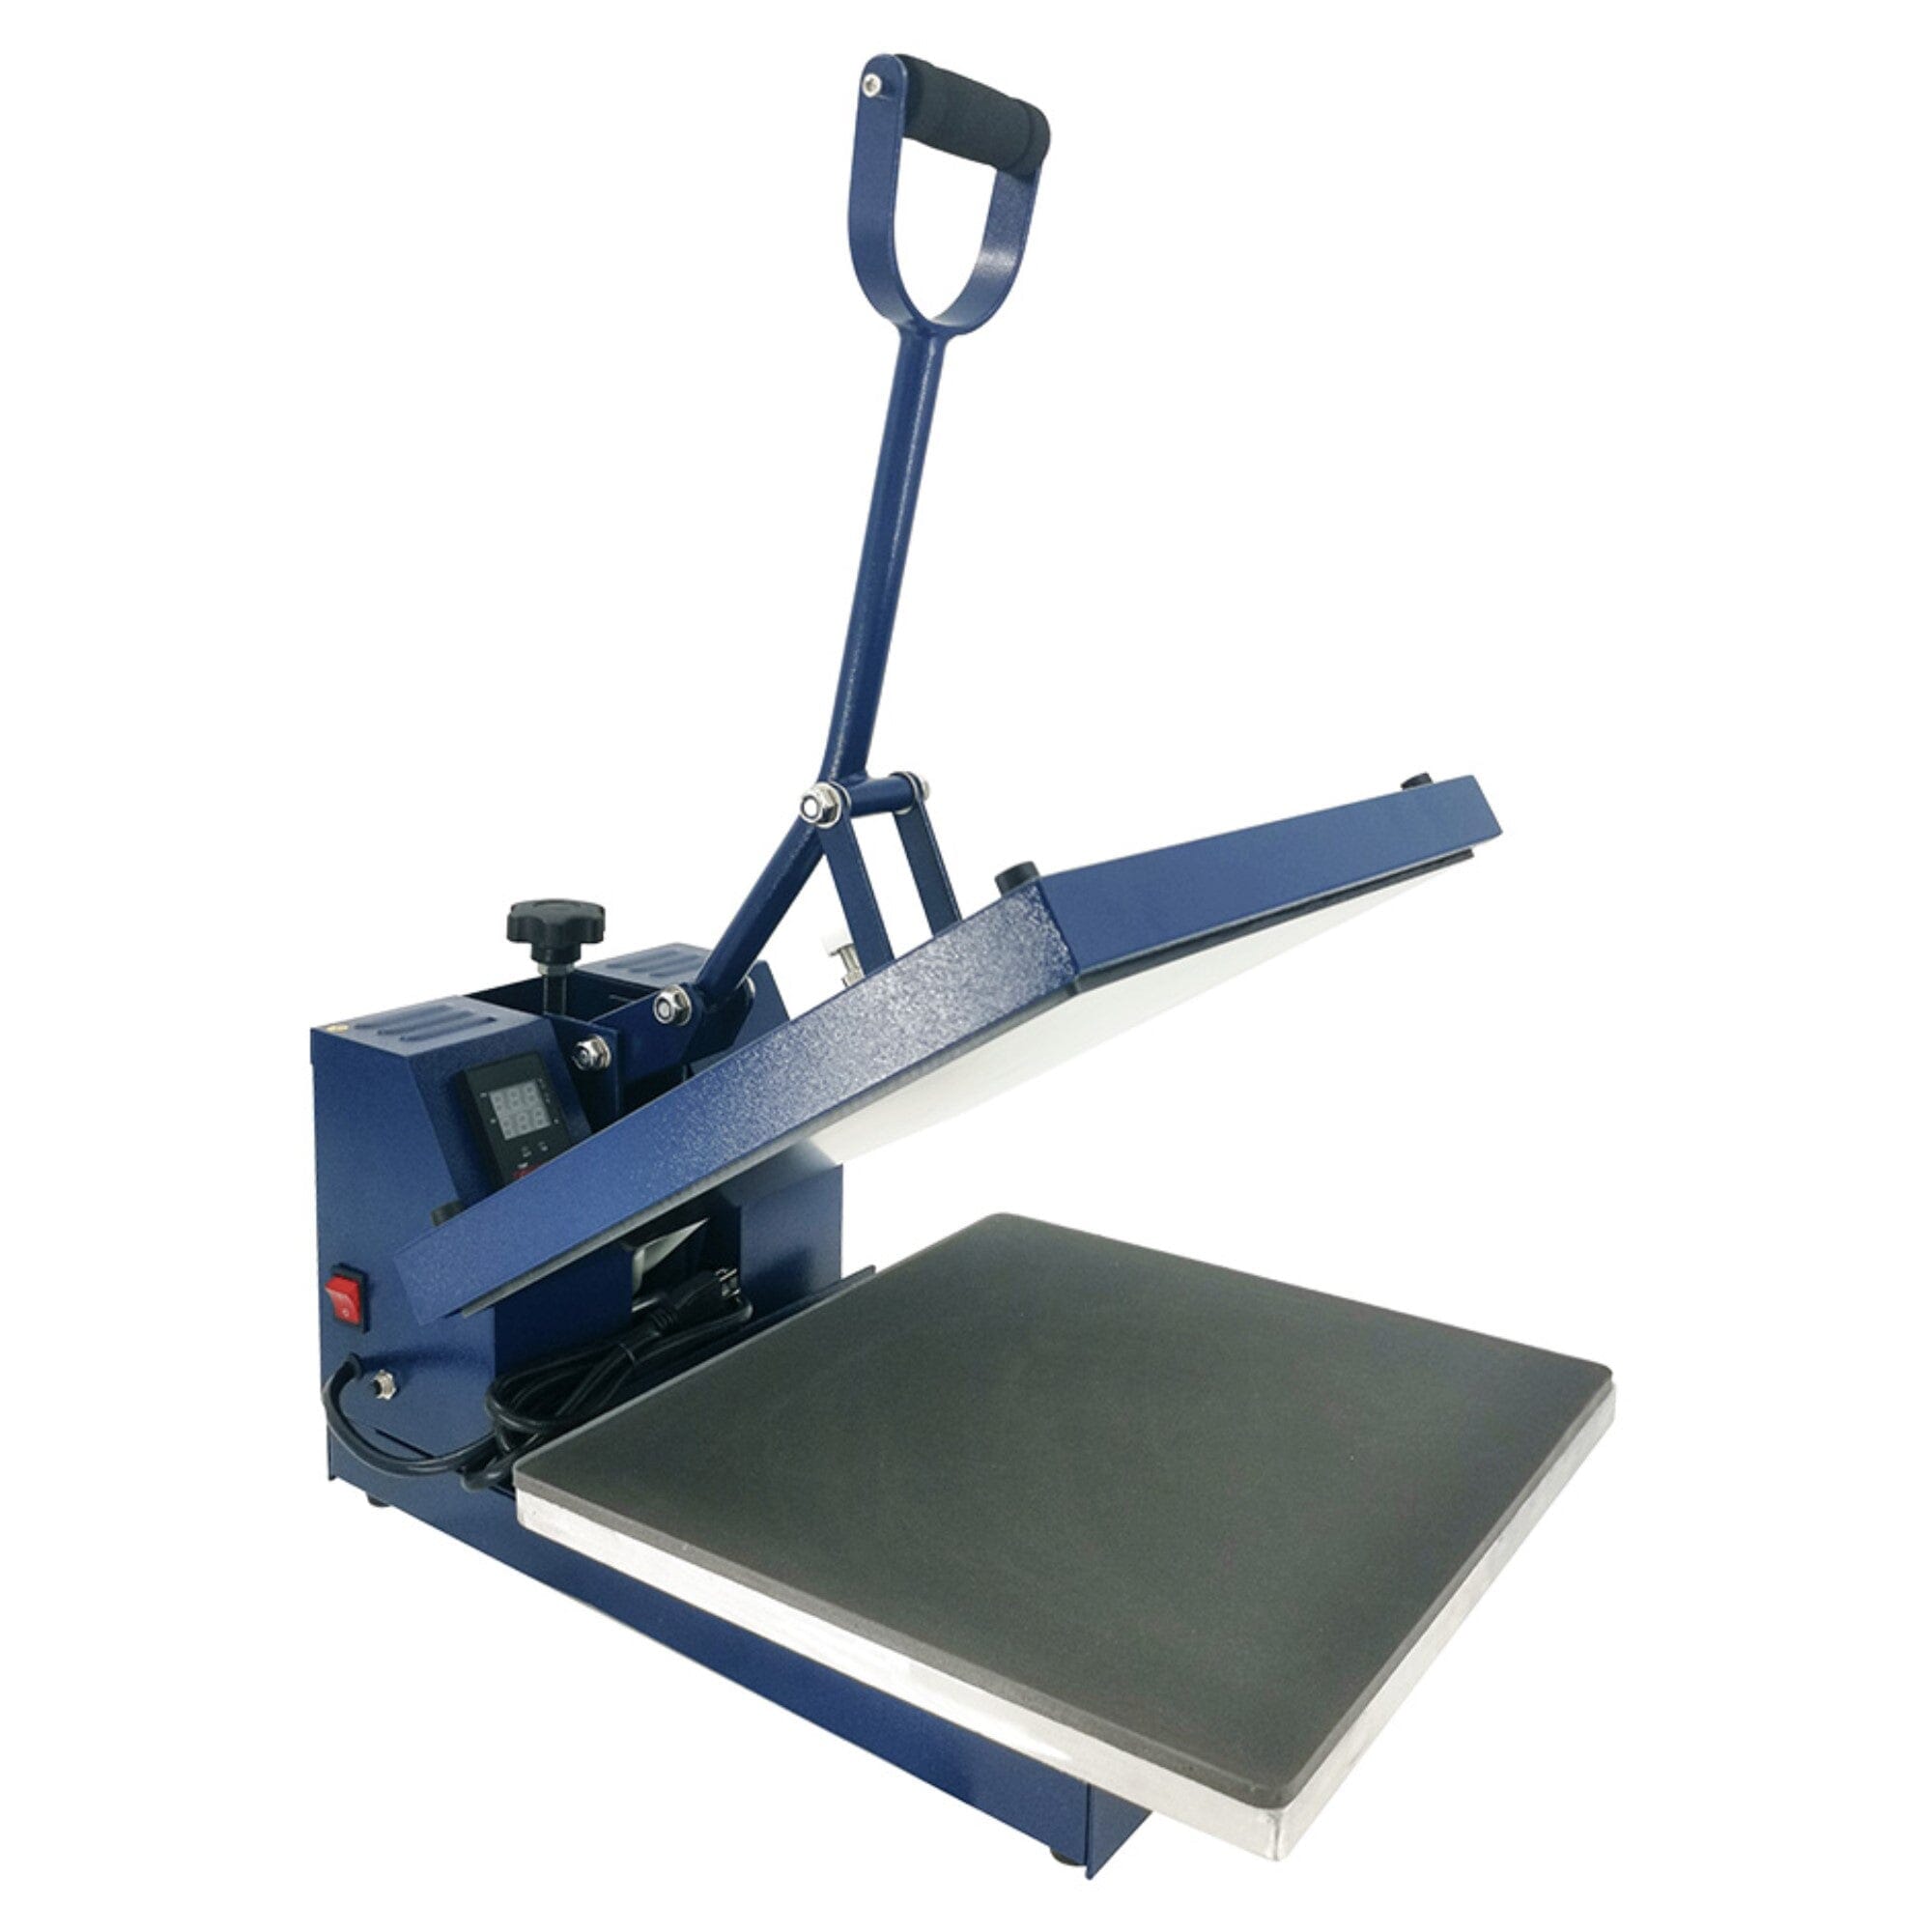 Heat Press Machines for sale in Woody, California